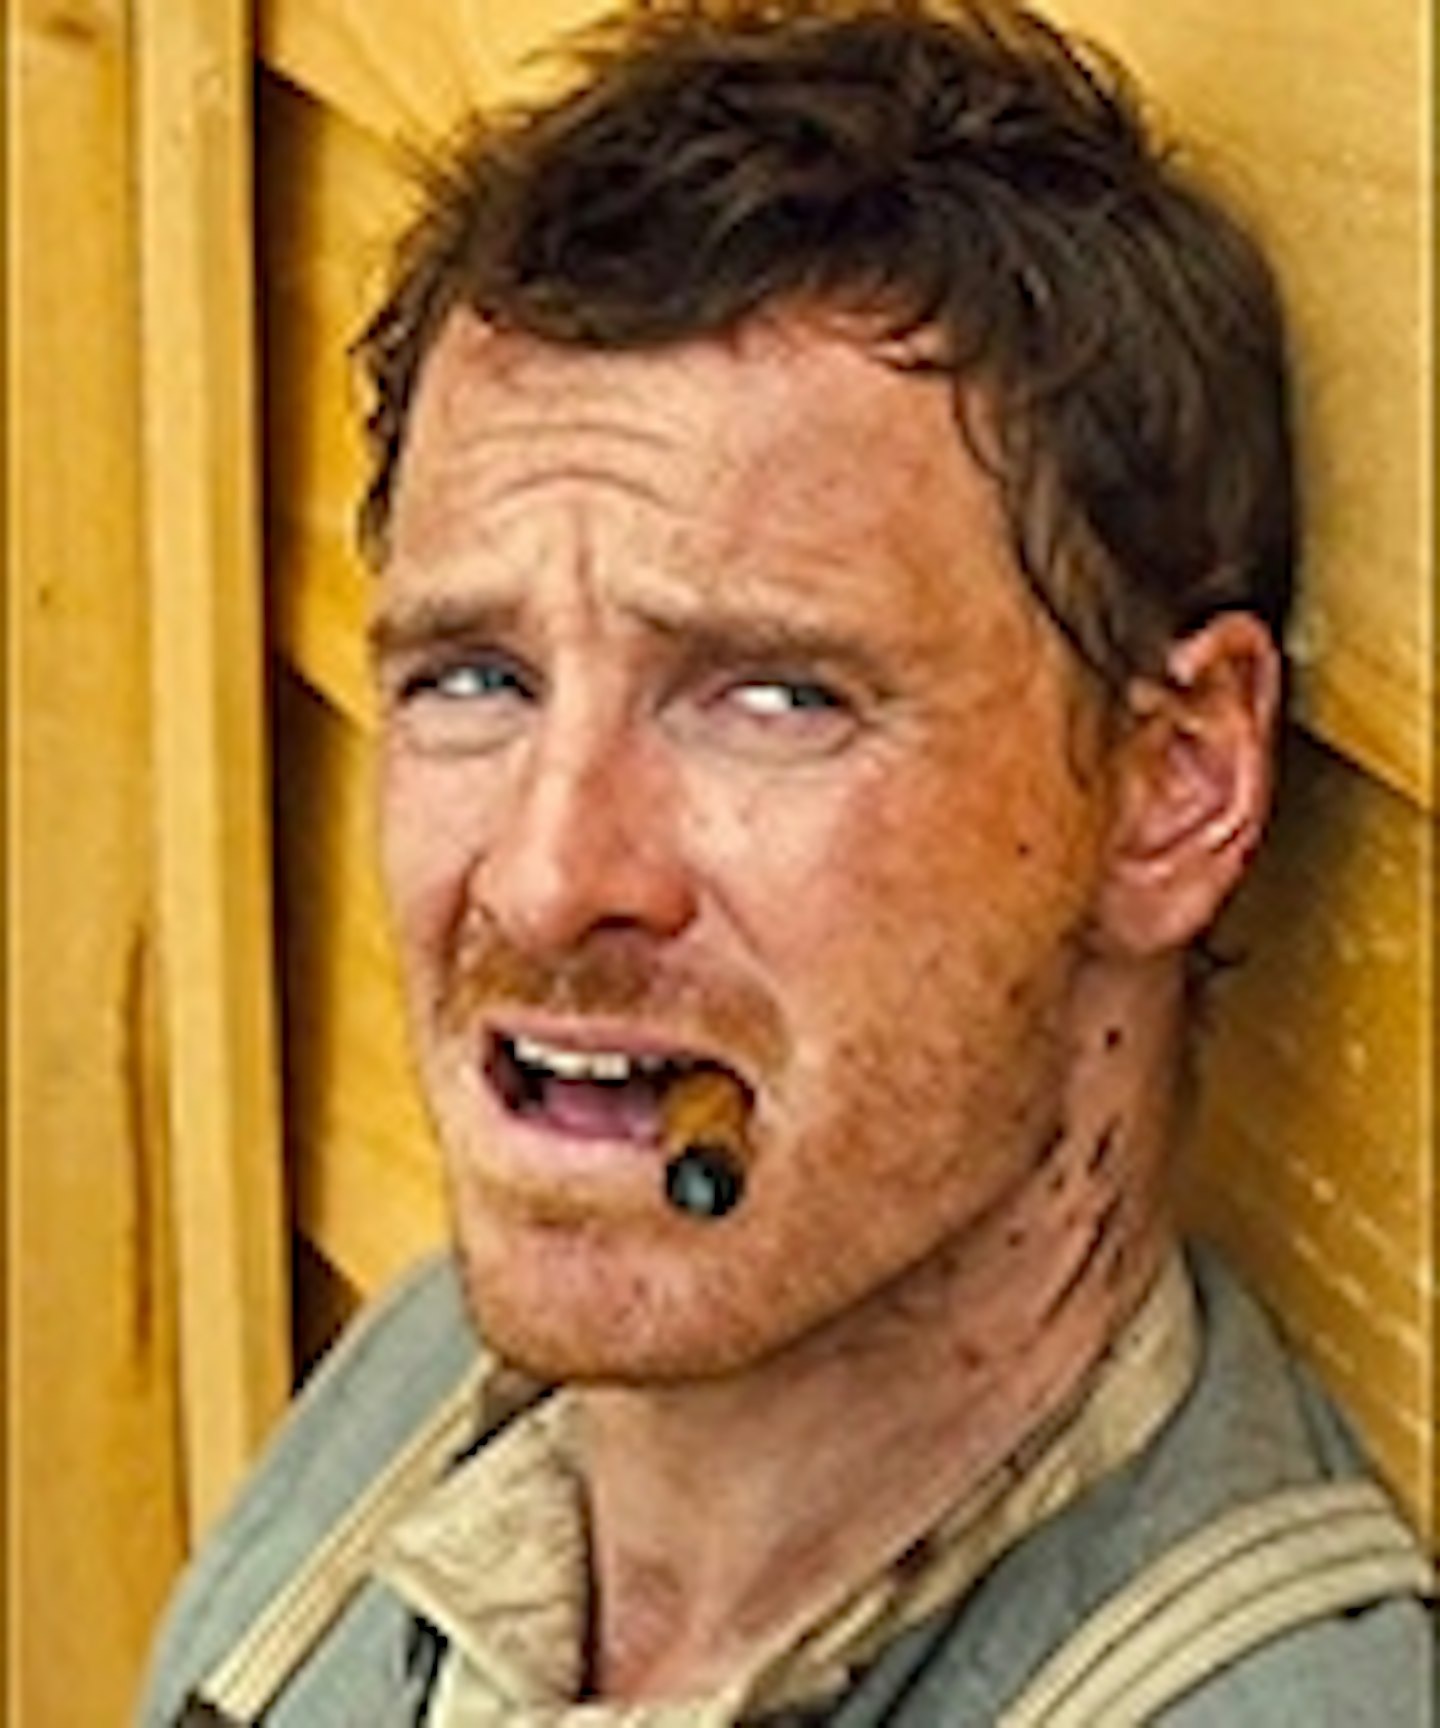 New Trailer For Michael Fassbender's Slow West